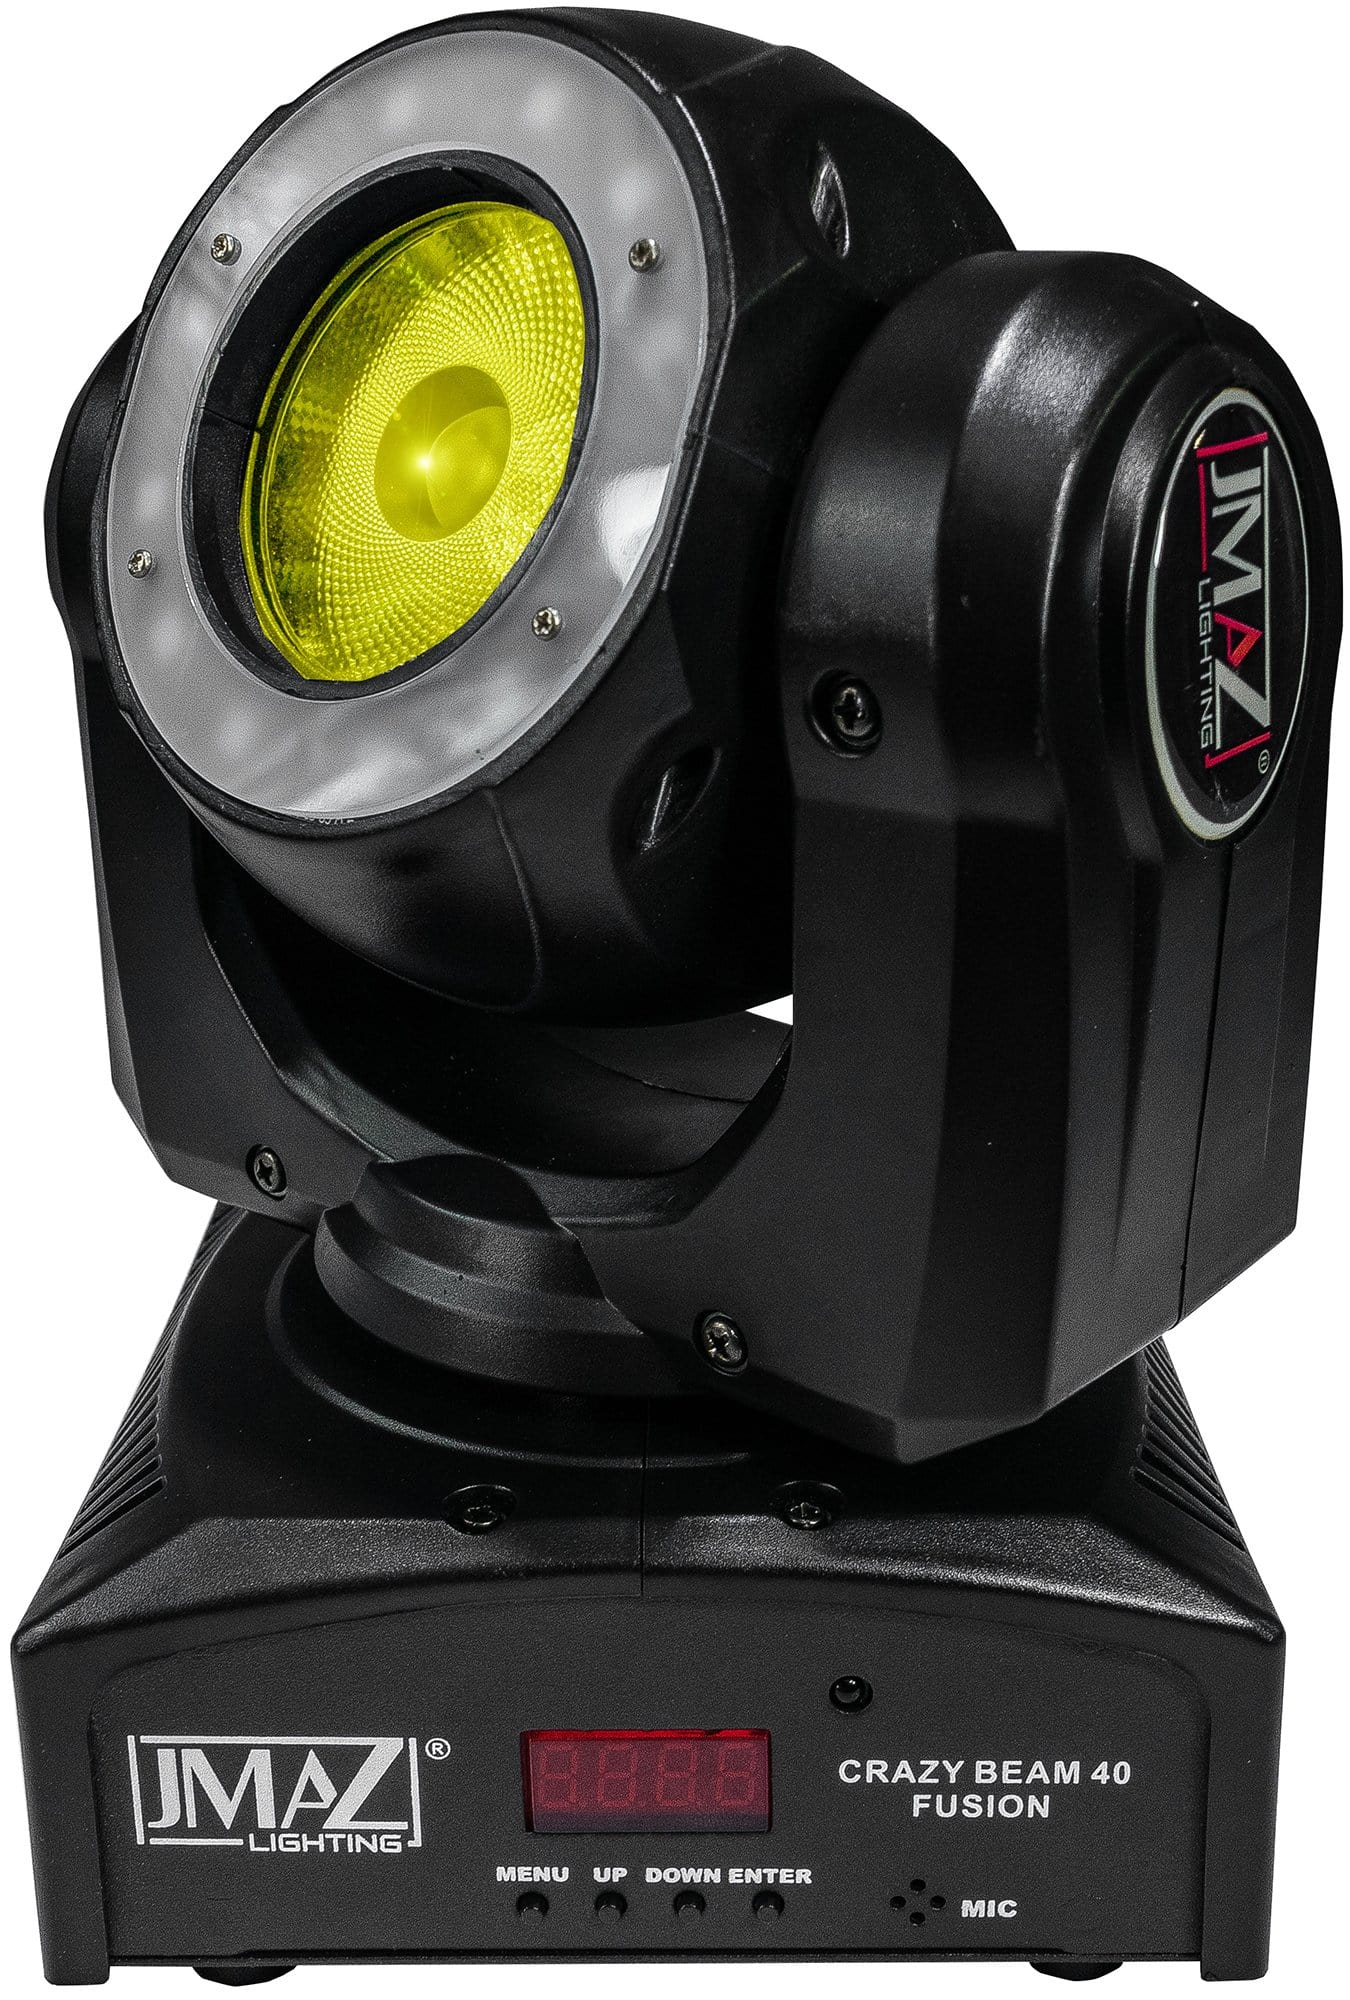 JMAZ Crazy Beam 40 Fusion 60w LED Moving Head - ProSound and Stage Lighting